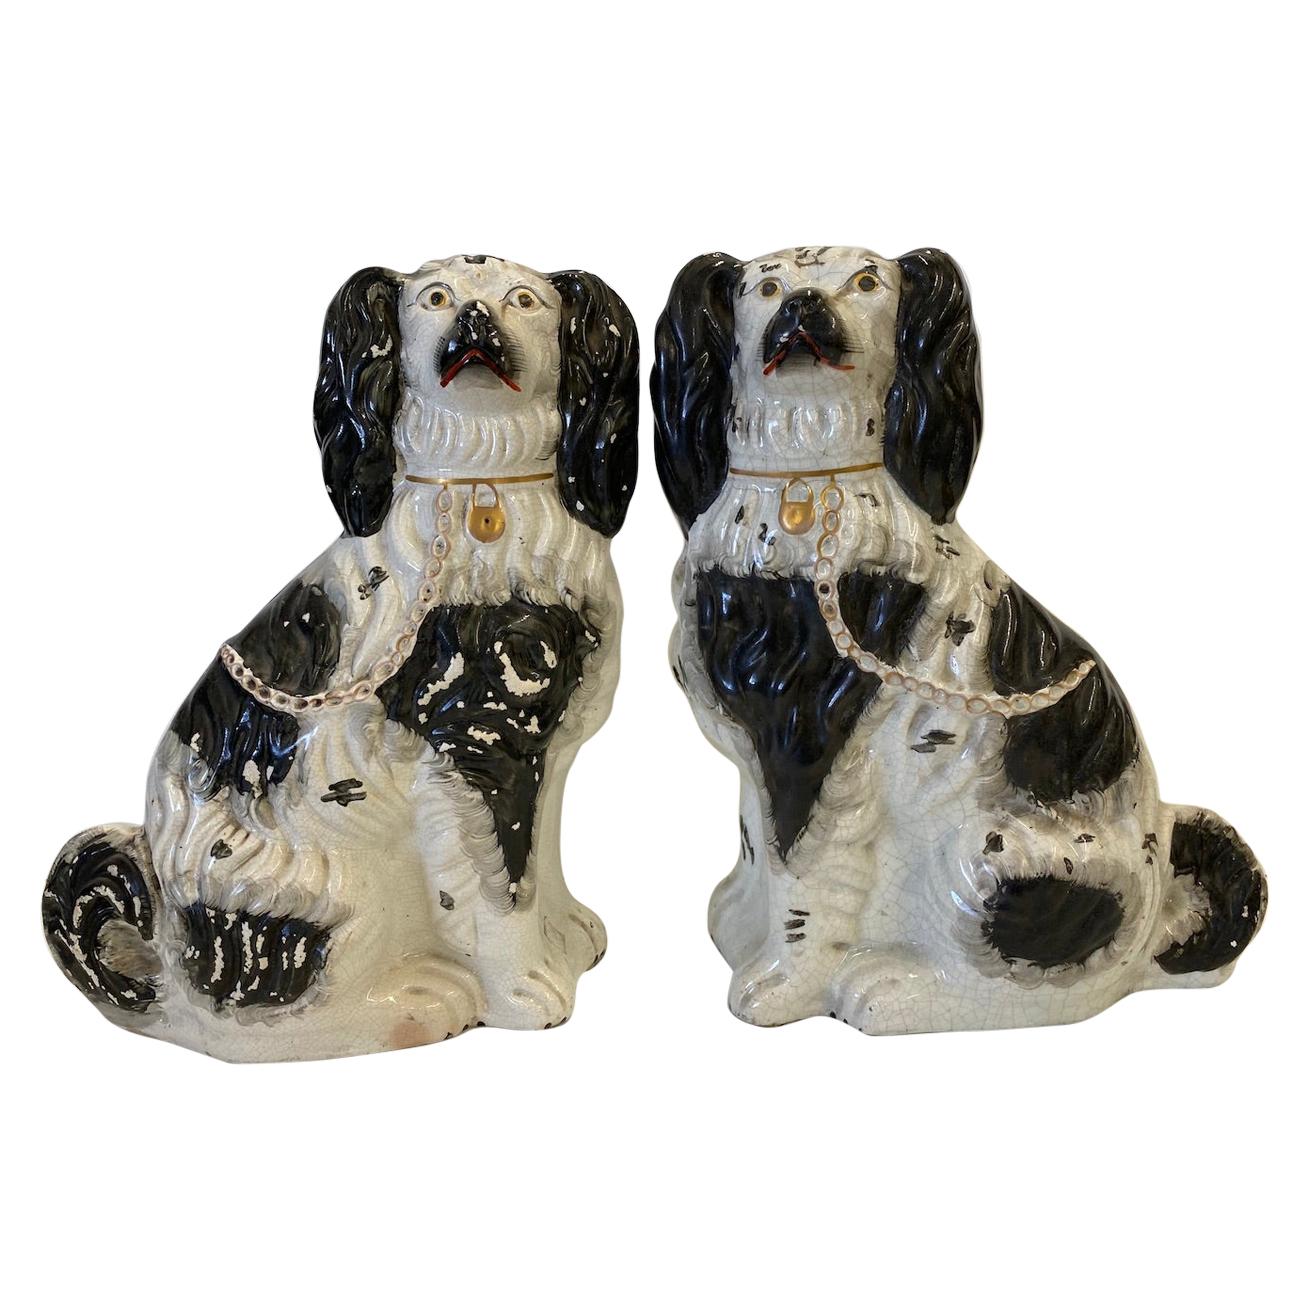 Large Pair of 19th Century English Staffordshire, Black and White Spaniels